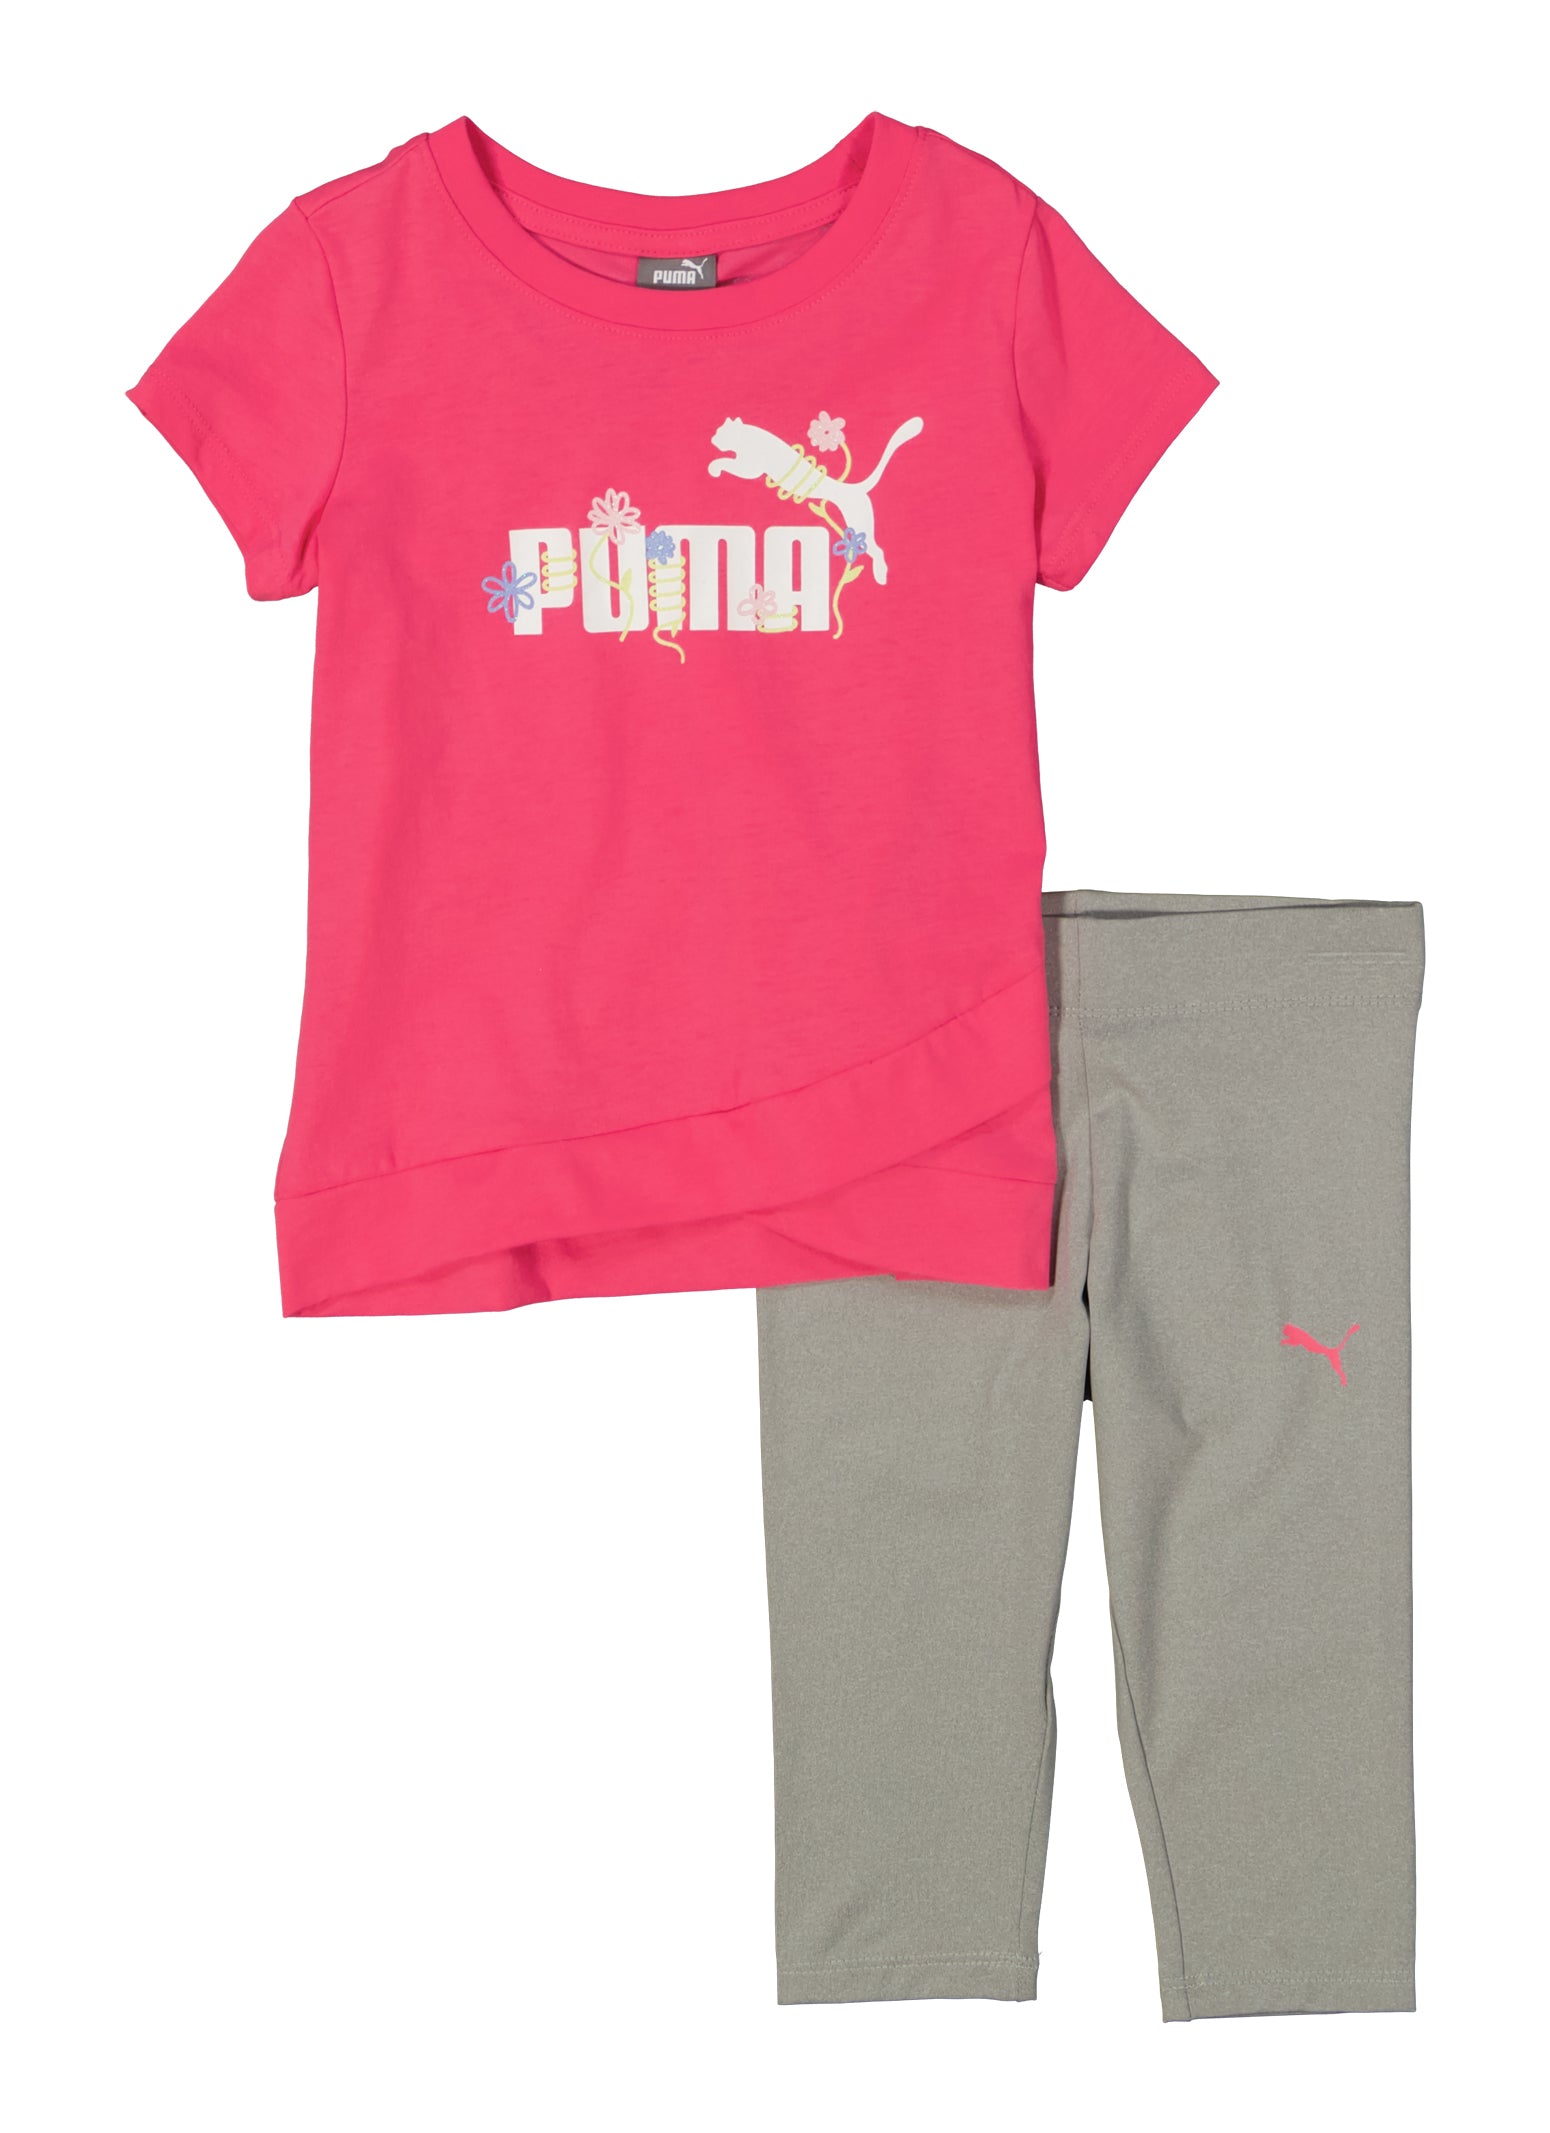 Little Girls Puma Flower Graphic Tee and Leggings - Neon Pink